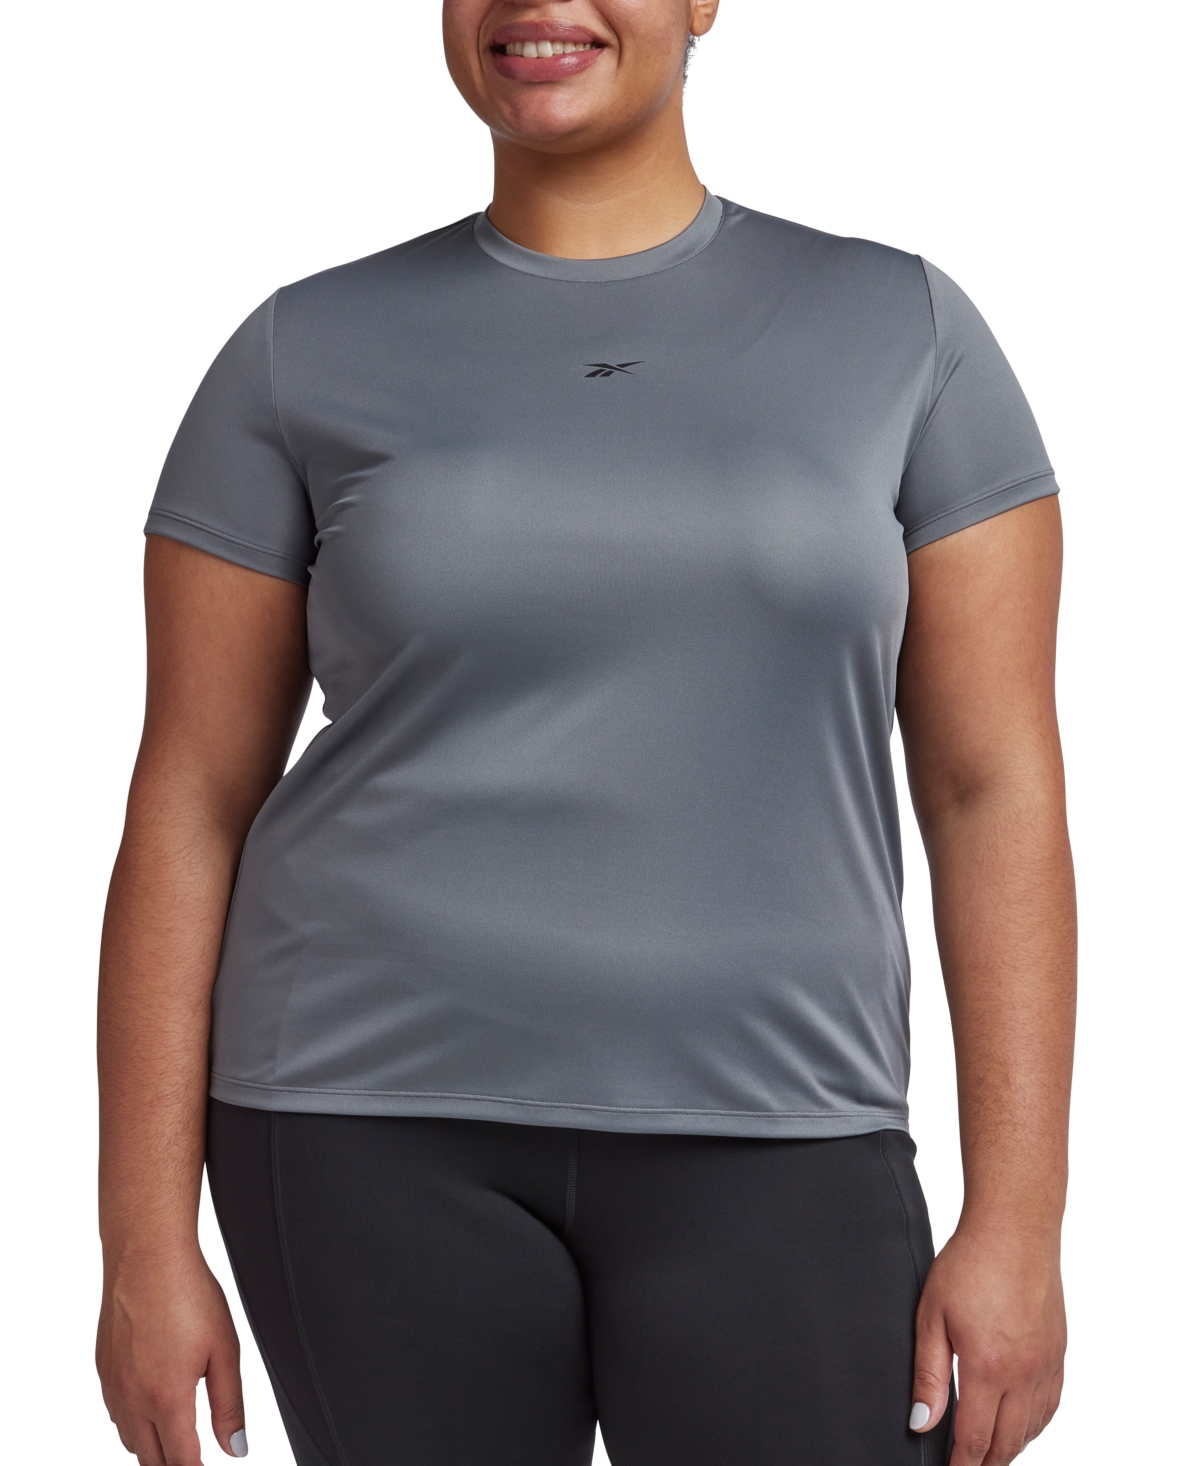 Plus Size Performance Tech Short-Sleeve Tee - Cold Grey